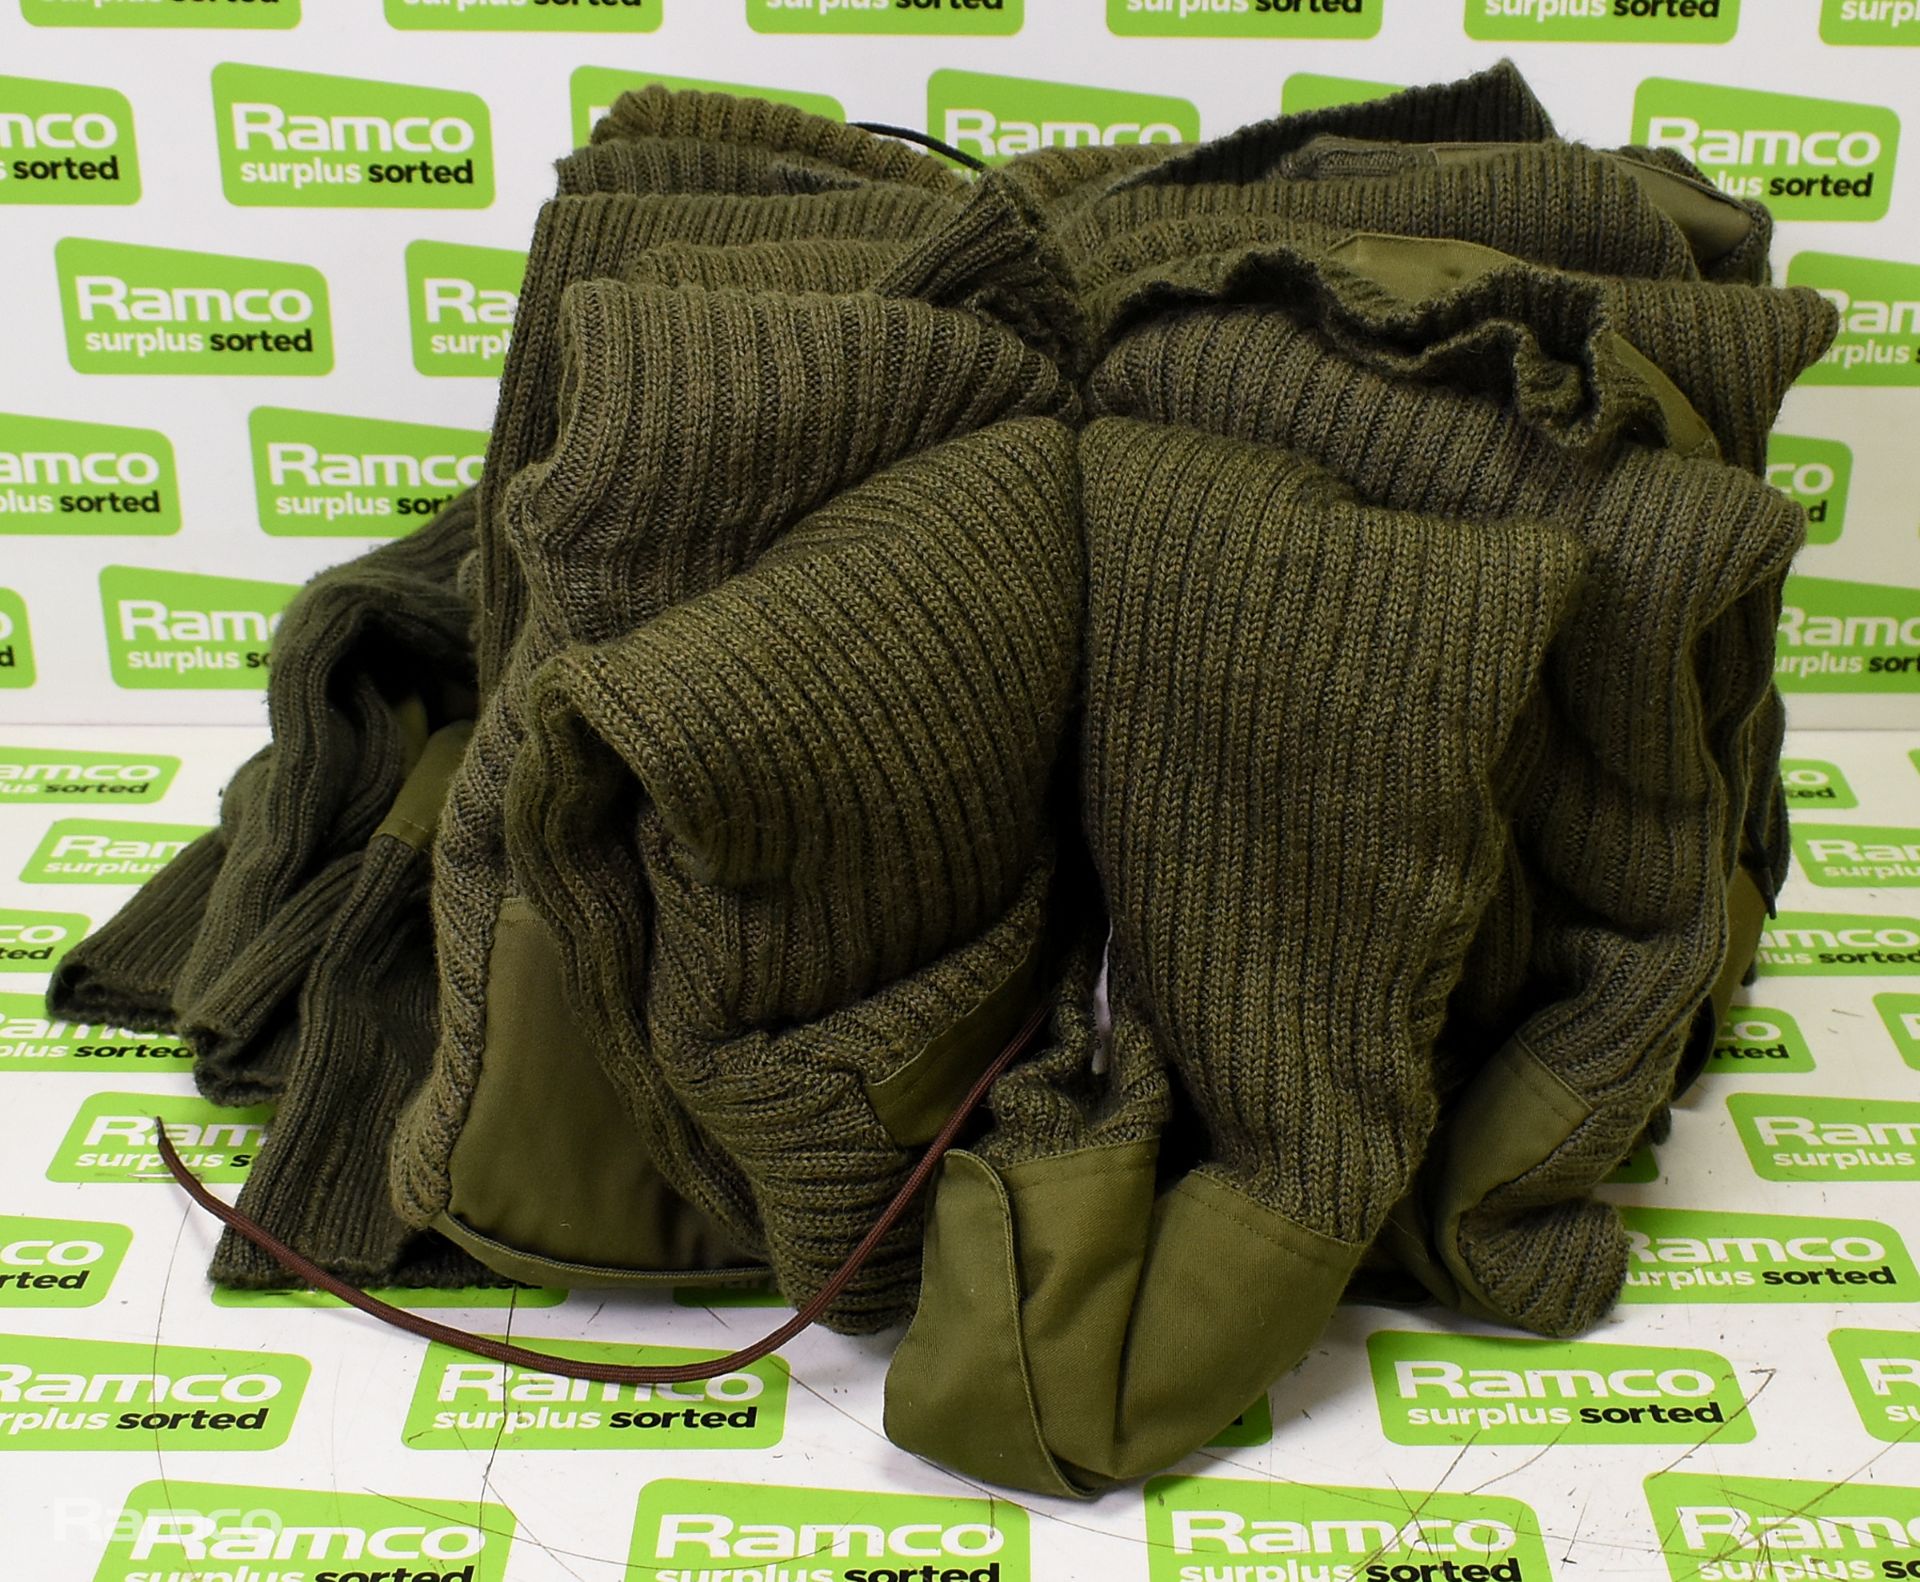 60x British Army wool jerseys - Olive - mixed grades and sizes - Image 9 of 10